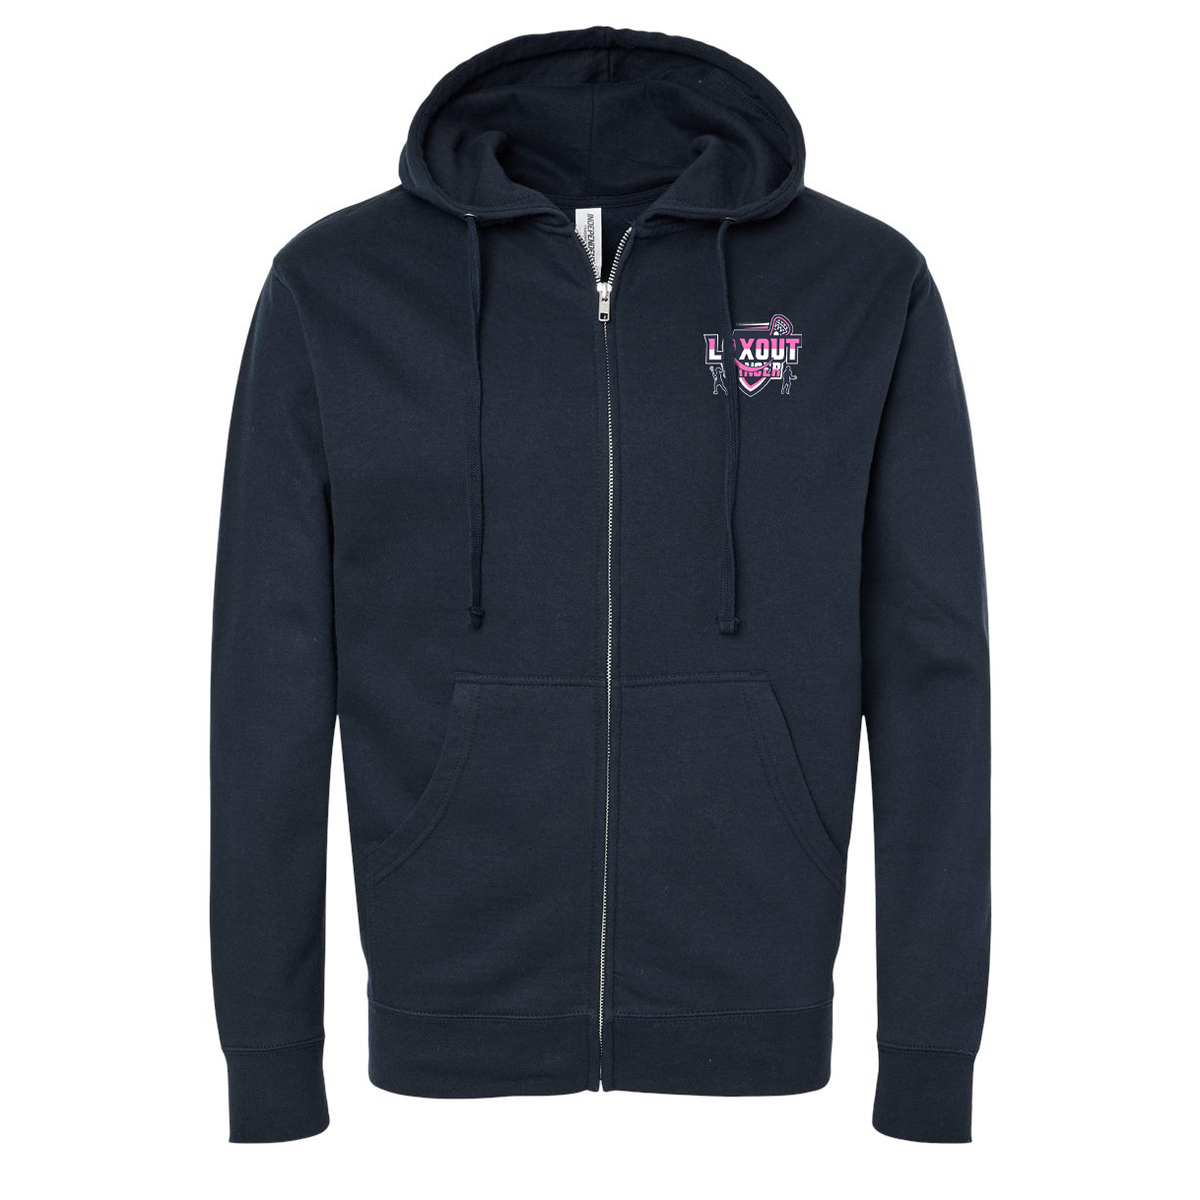 LaxOut Cancer Full Zip Hoodie